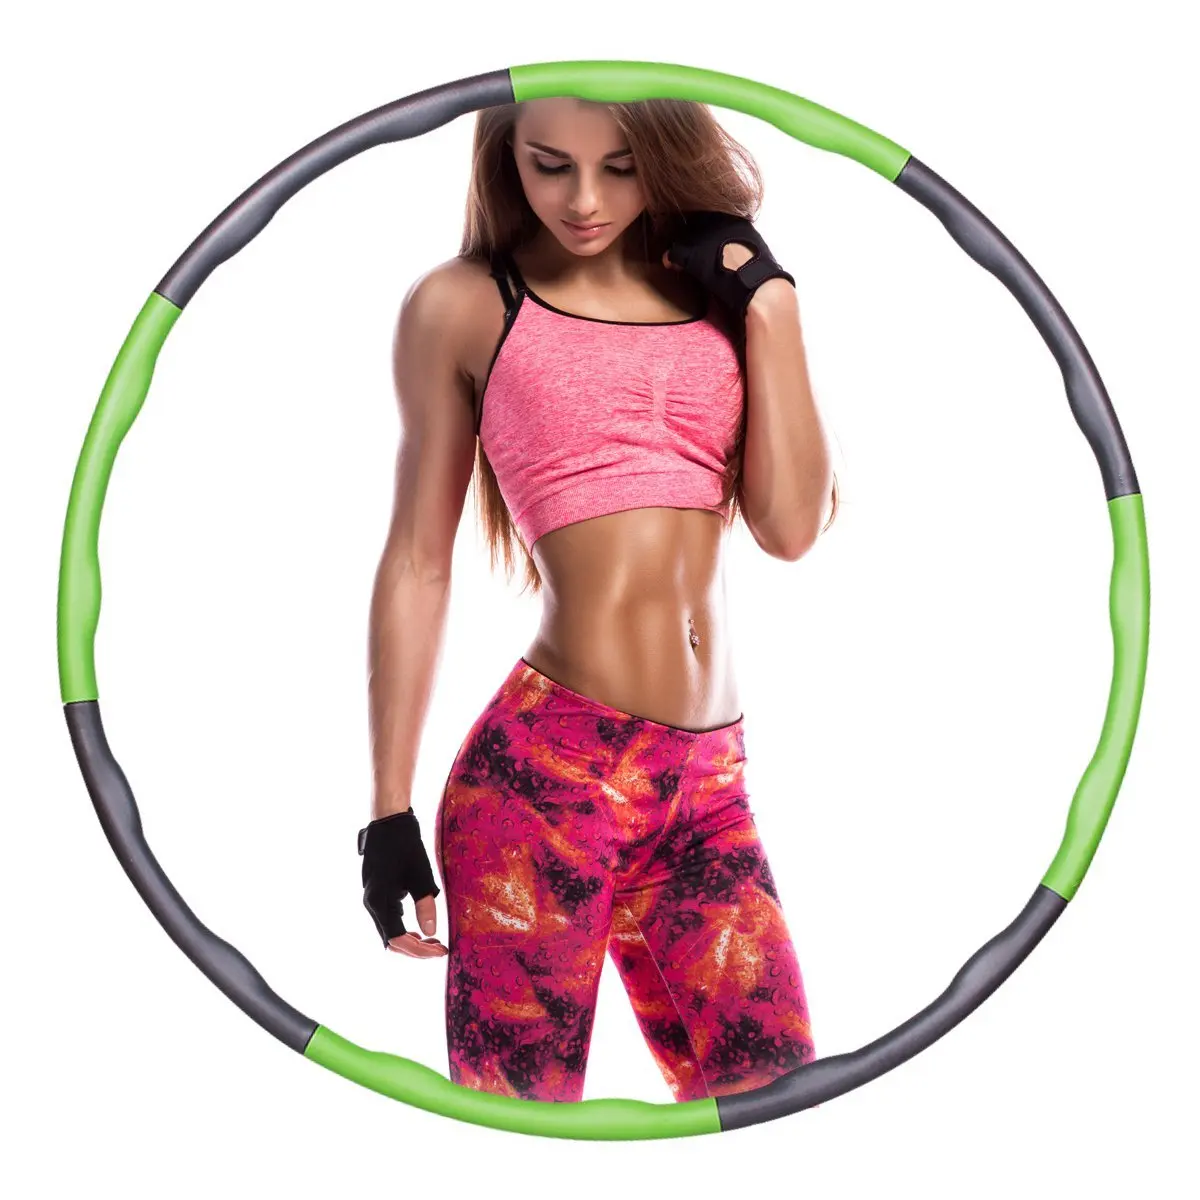 where can i buy a hula hoop for exercise